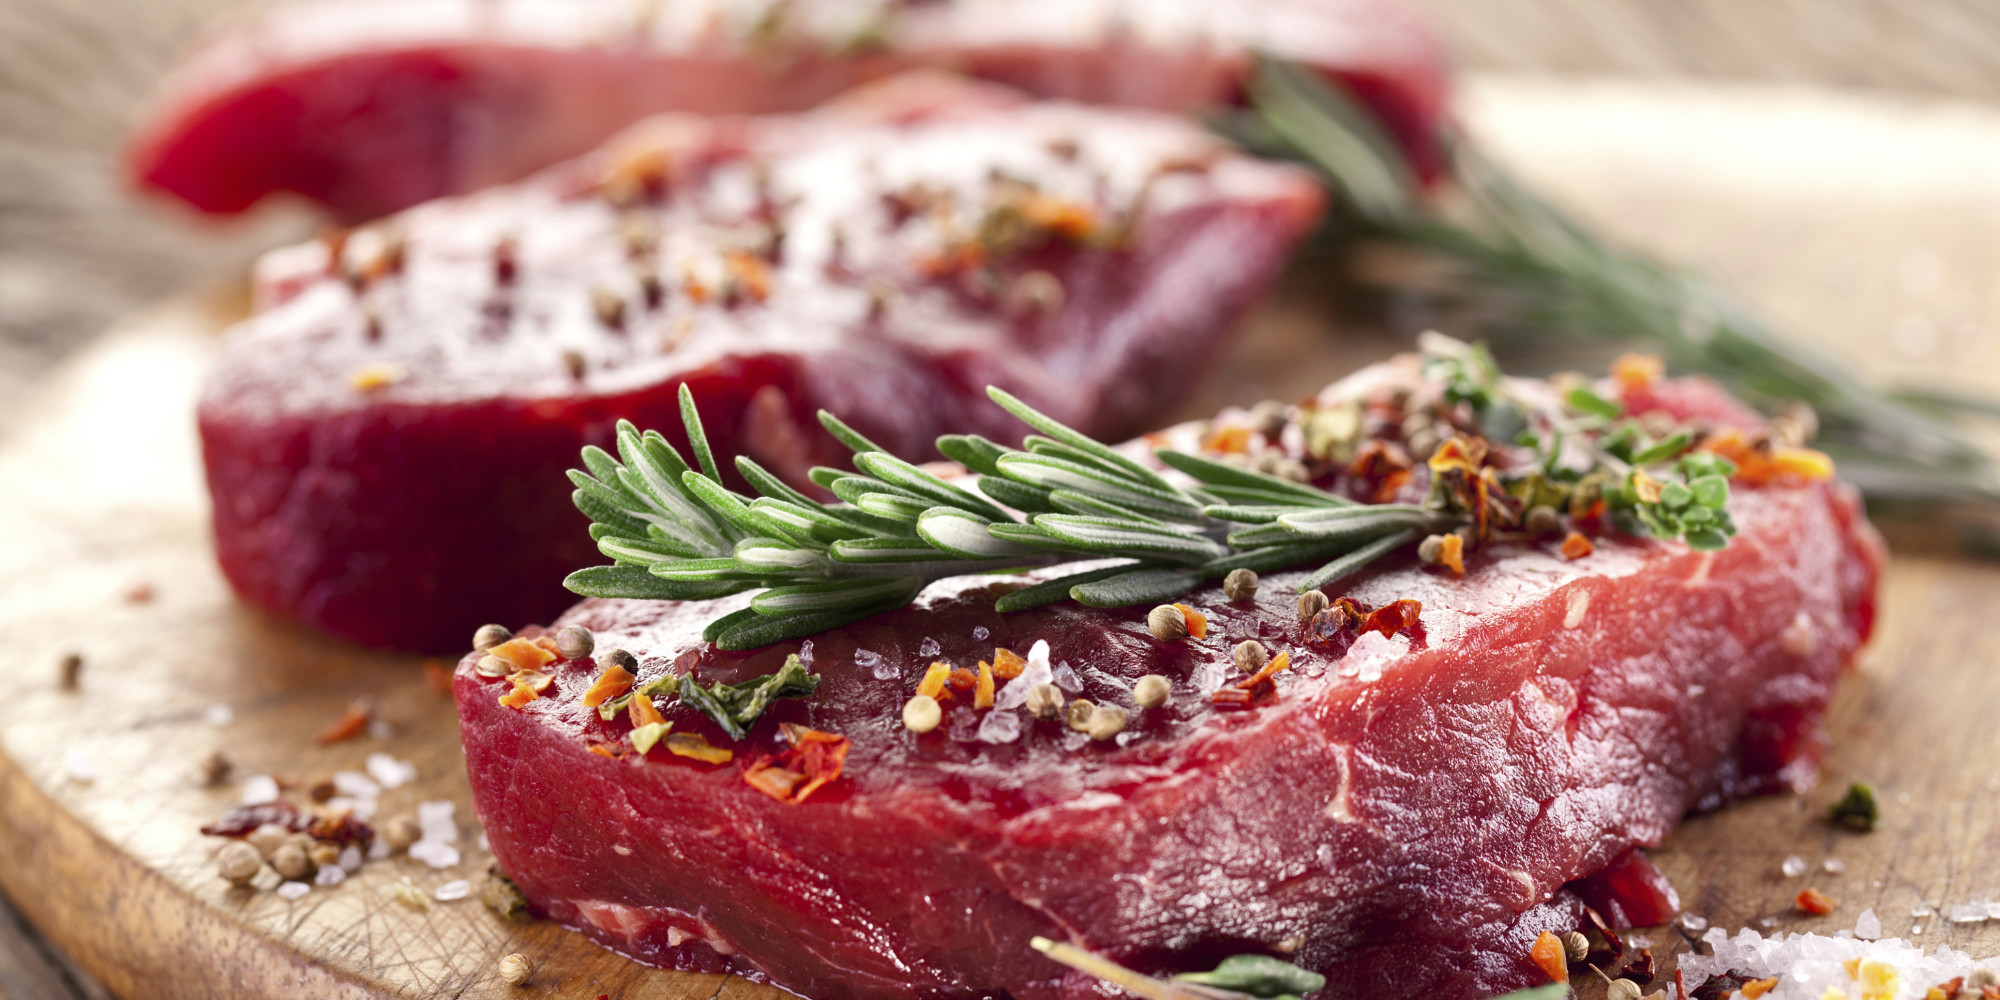 Red Meat Makes You Put On Weight, While Yogurt, Seafood And Nuts Aid